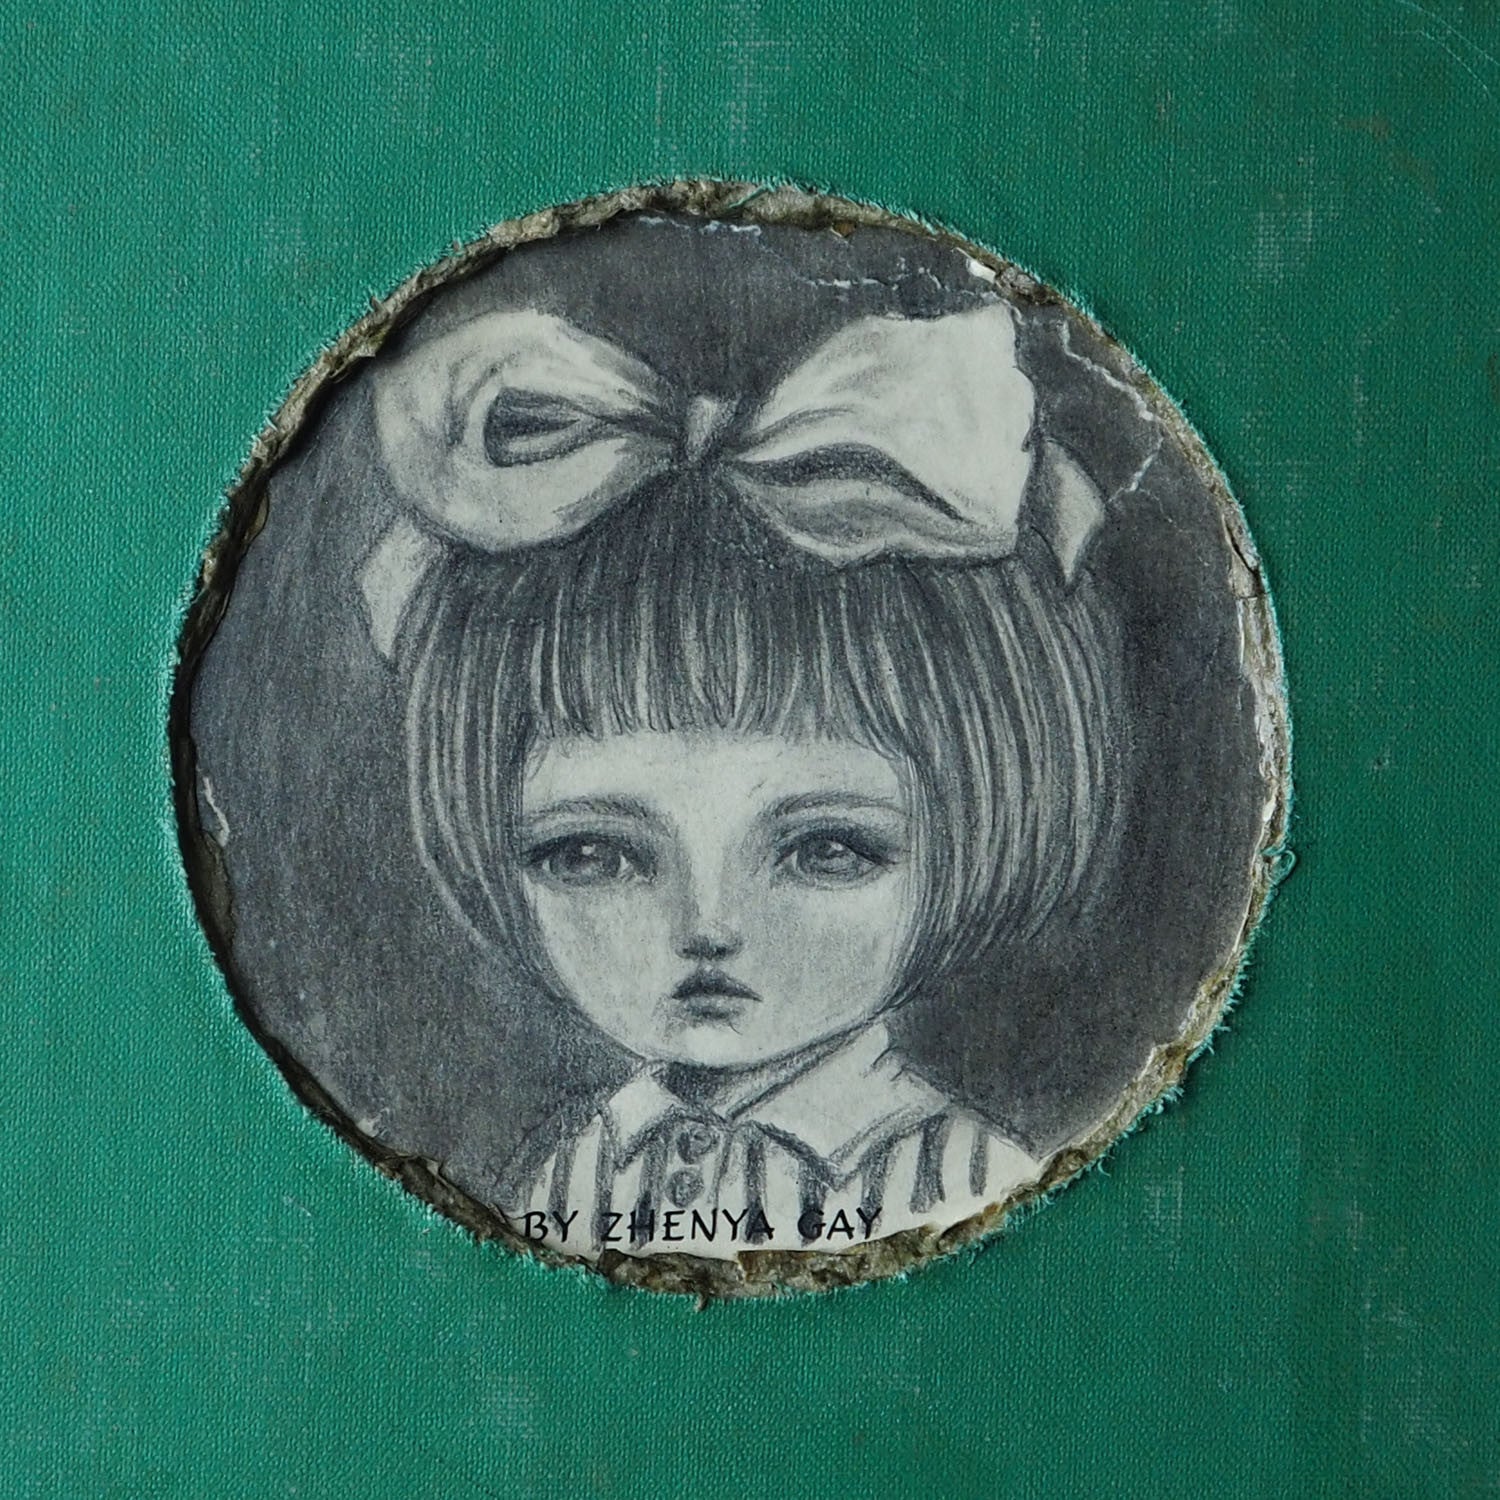 A beautiful mixed media altered book by Danita Art. One of her astonishing girls adorns the cover in a pencil and graphite drawing on the hard cover of an antique library book.